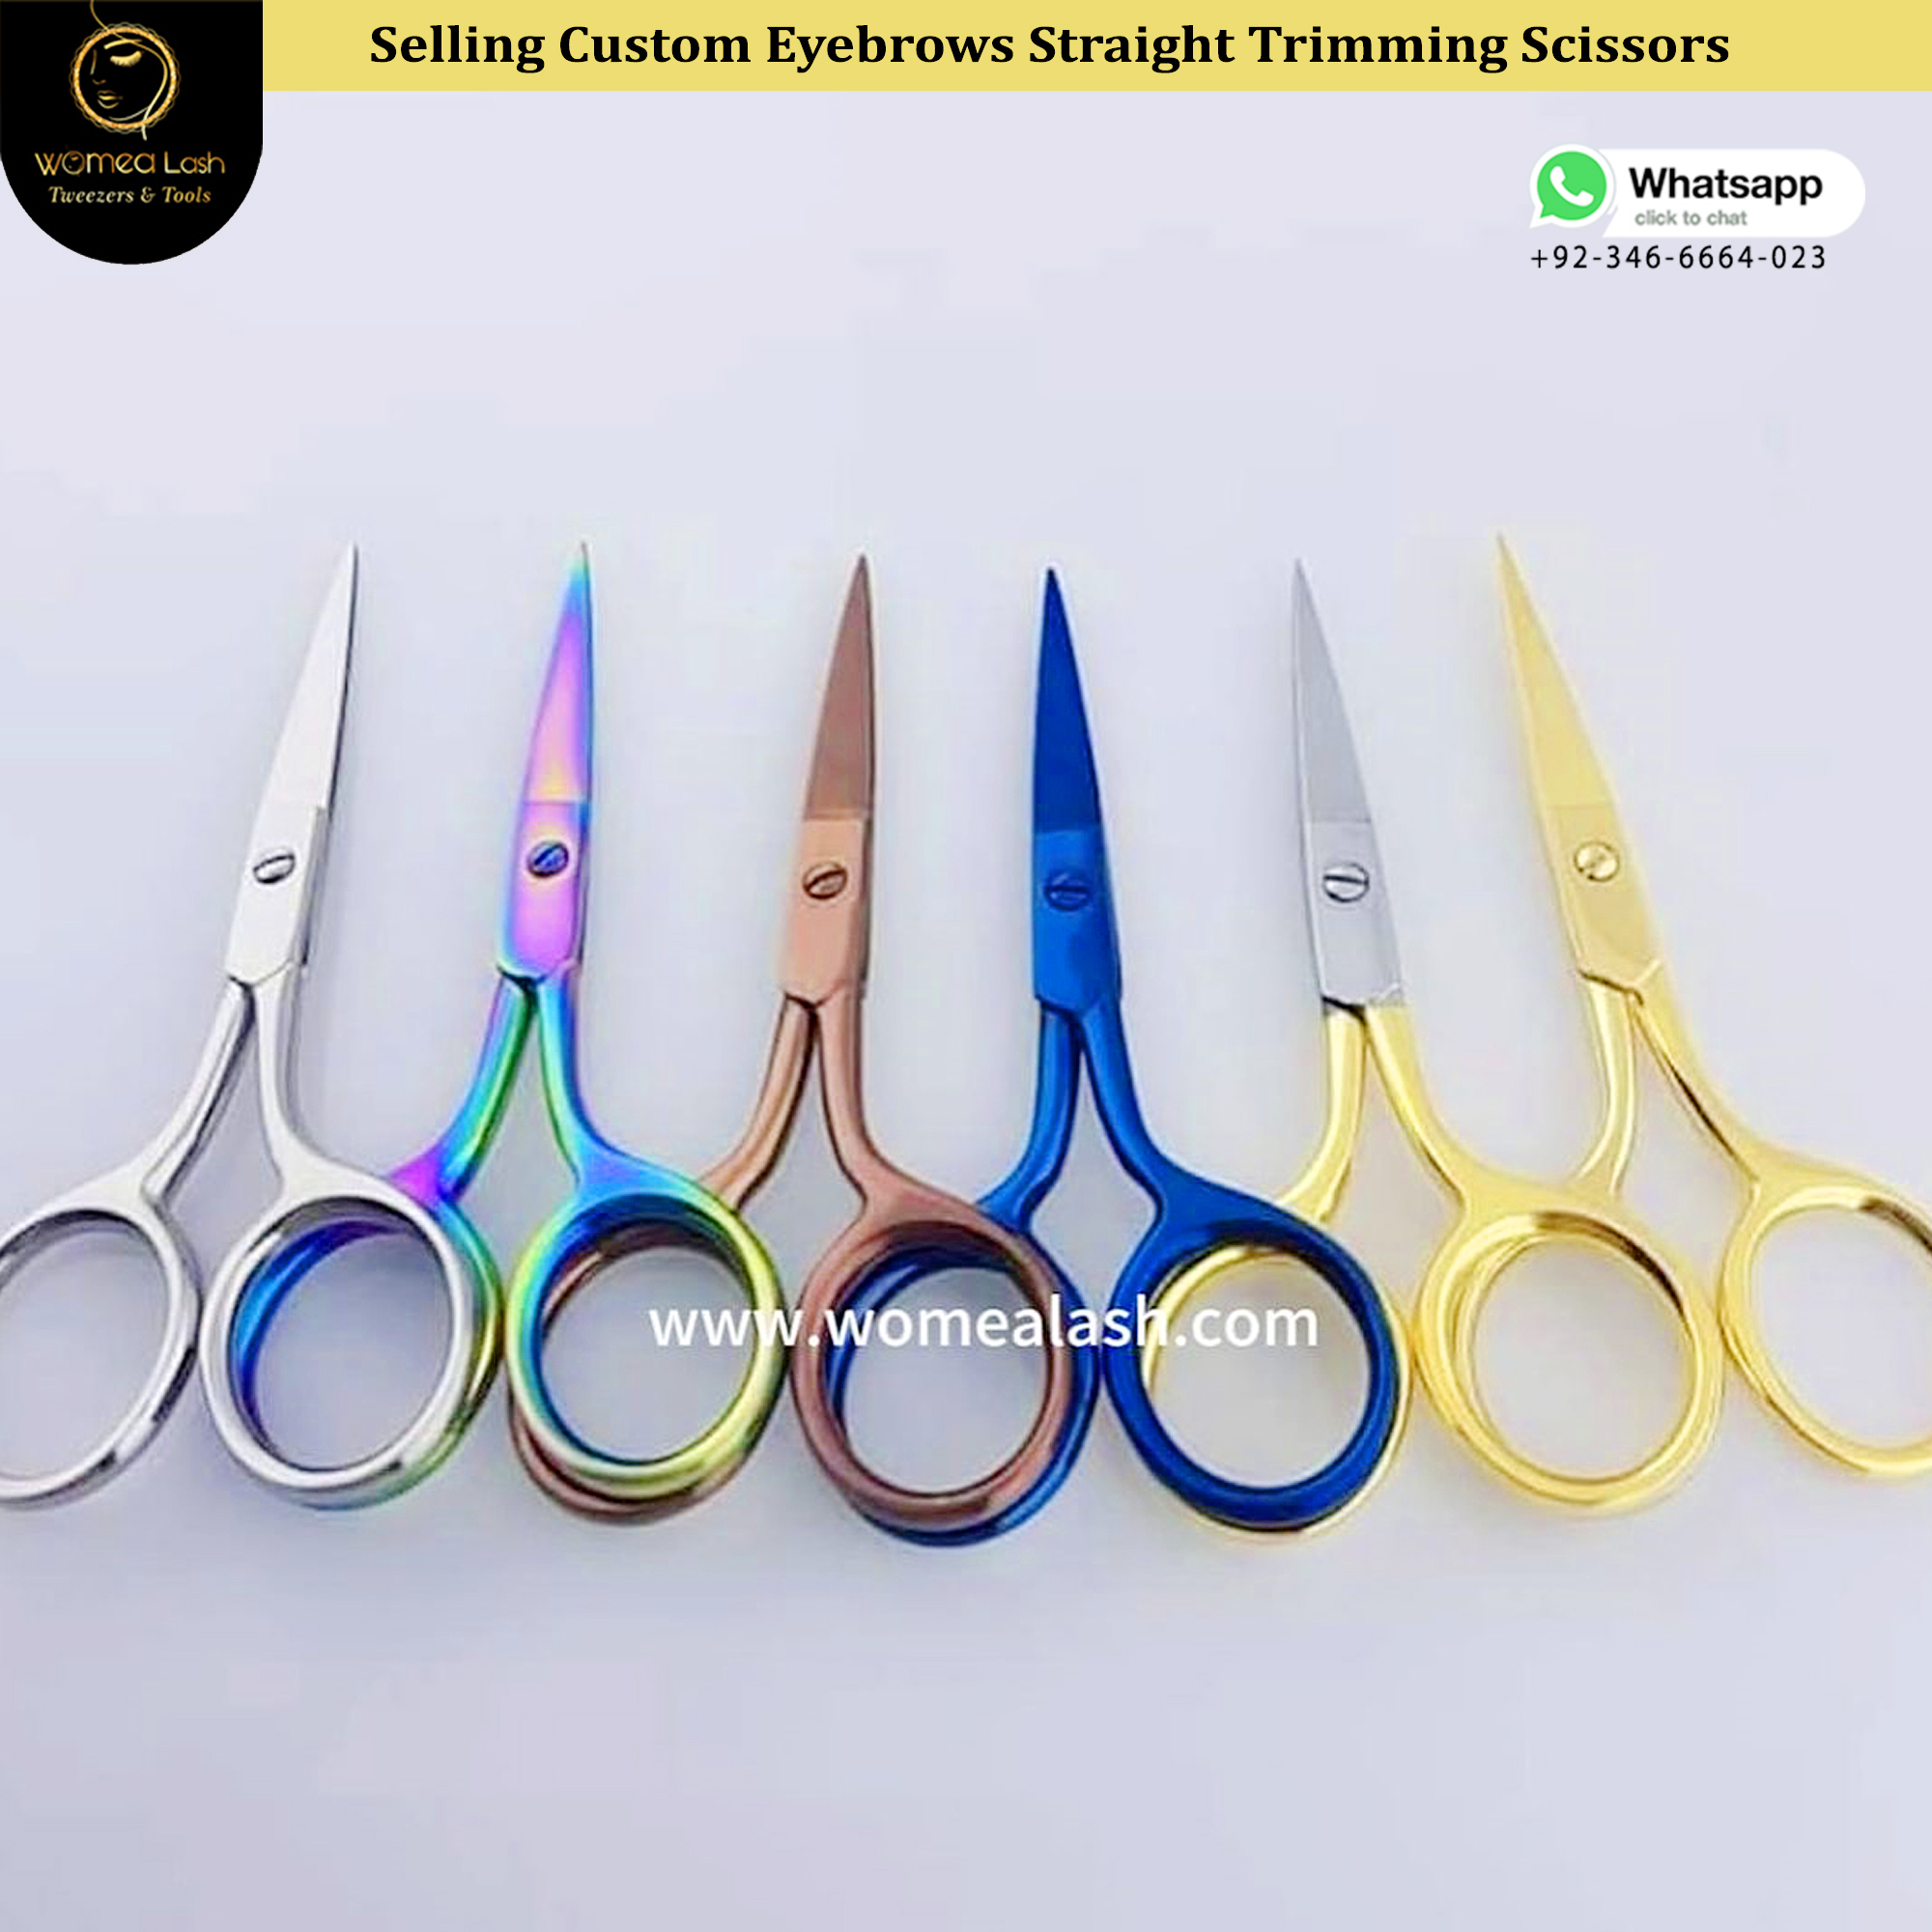 Selling Custom Eyebrows Straight Trimming Scissors in Multiple Colors 